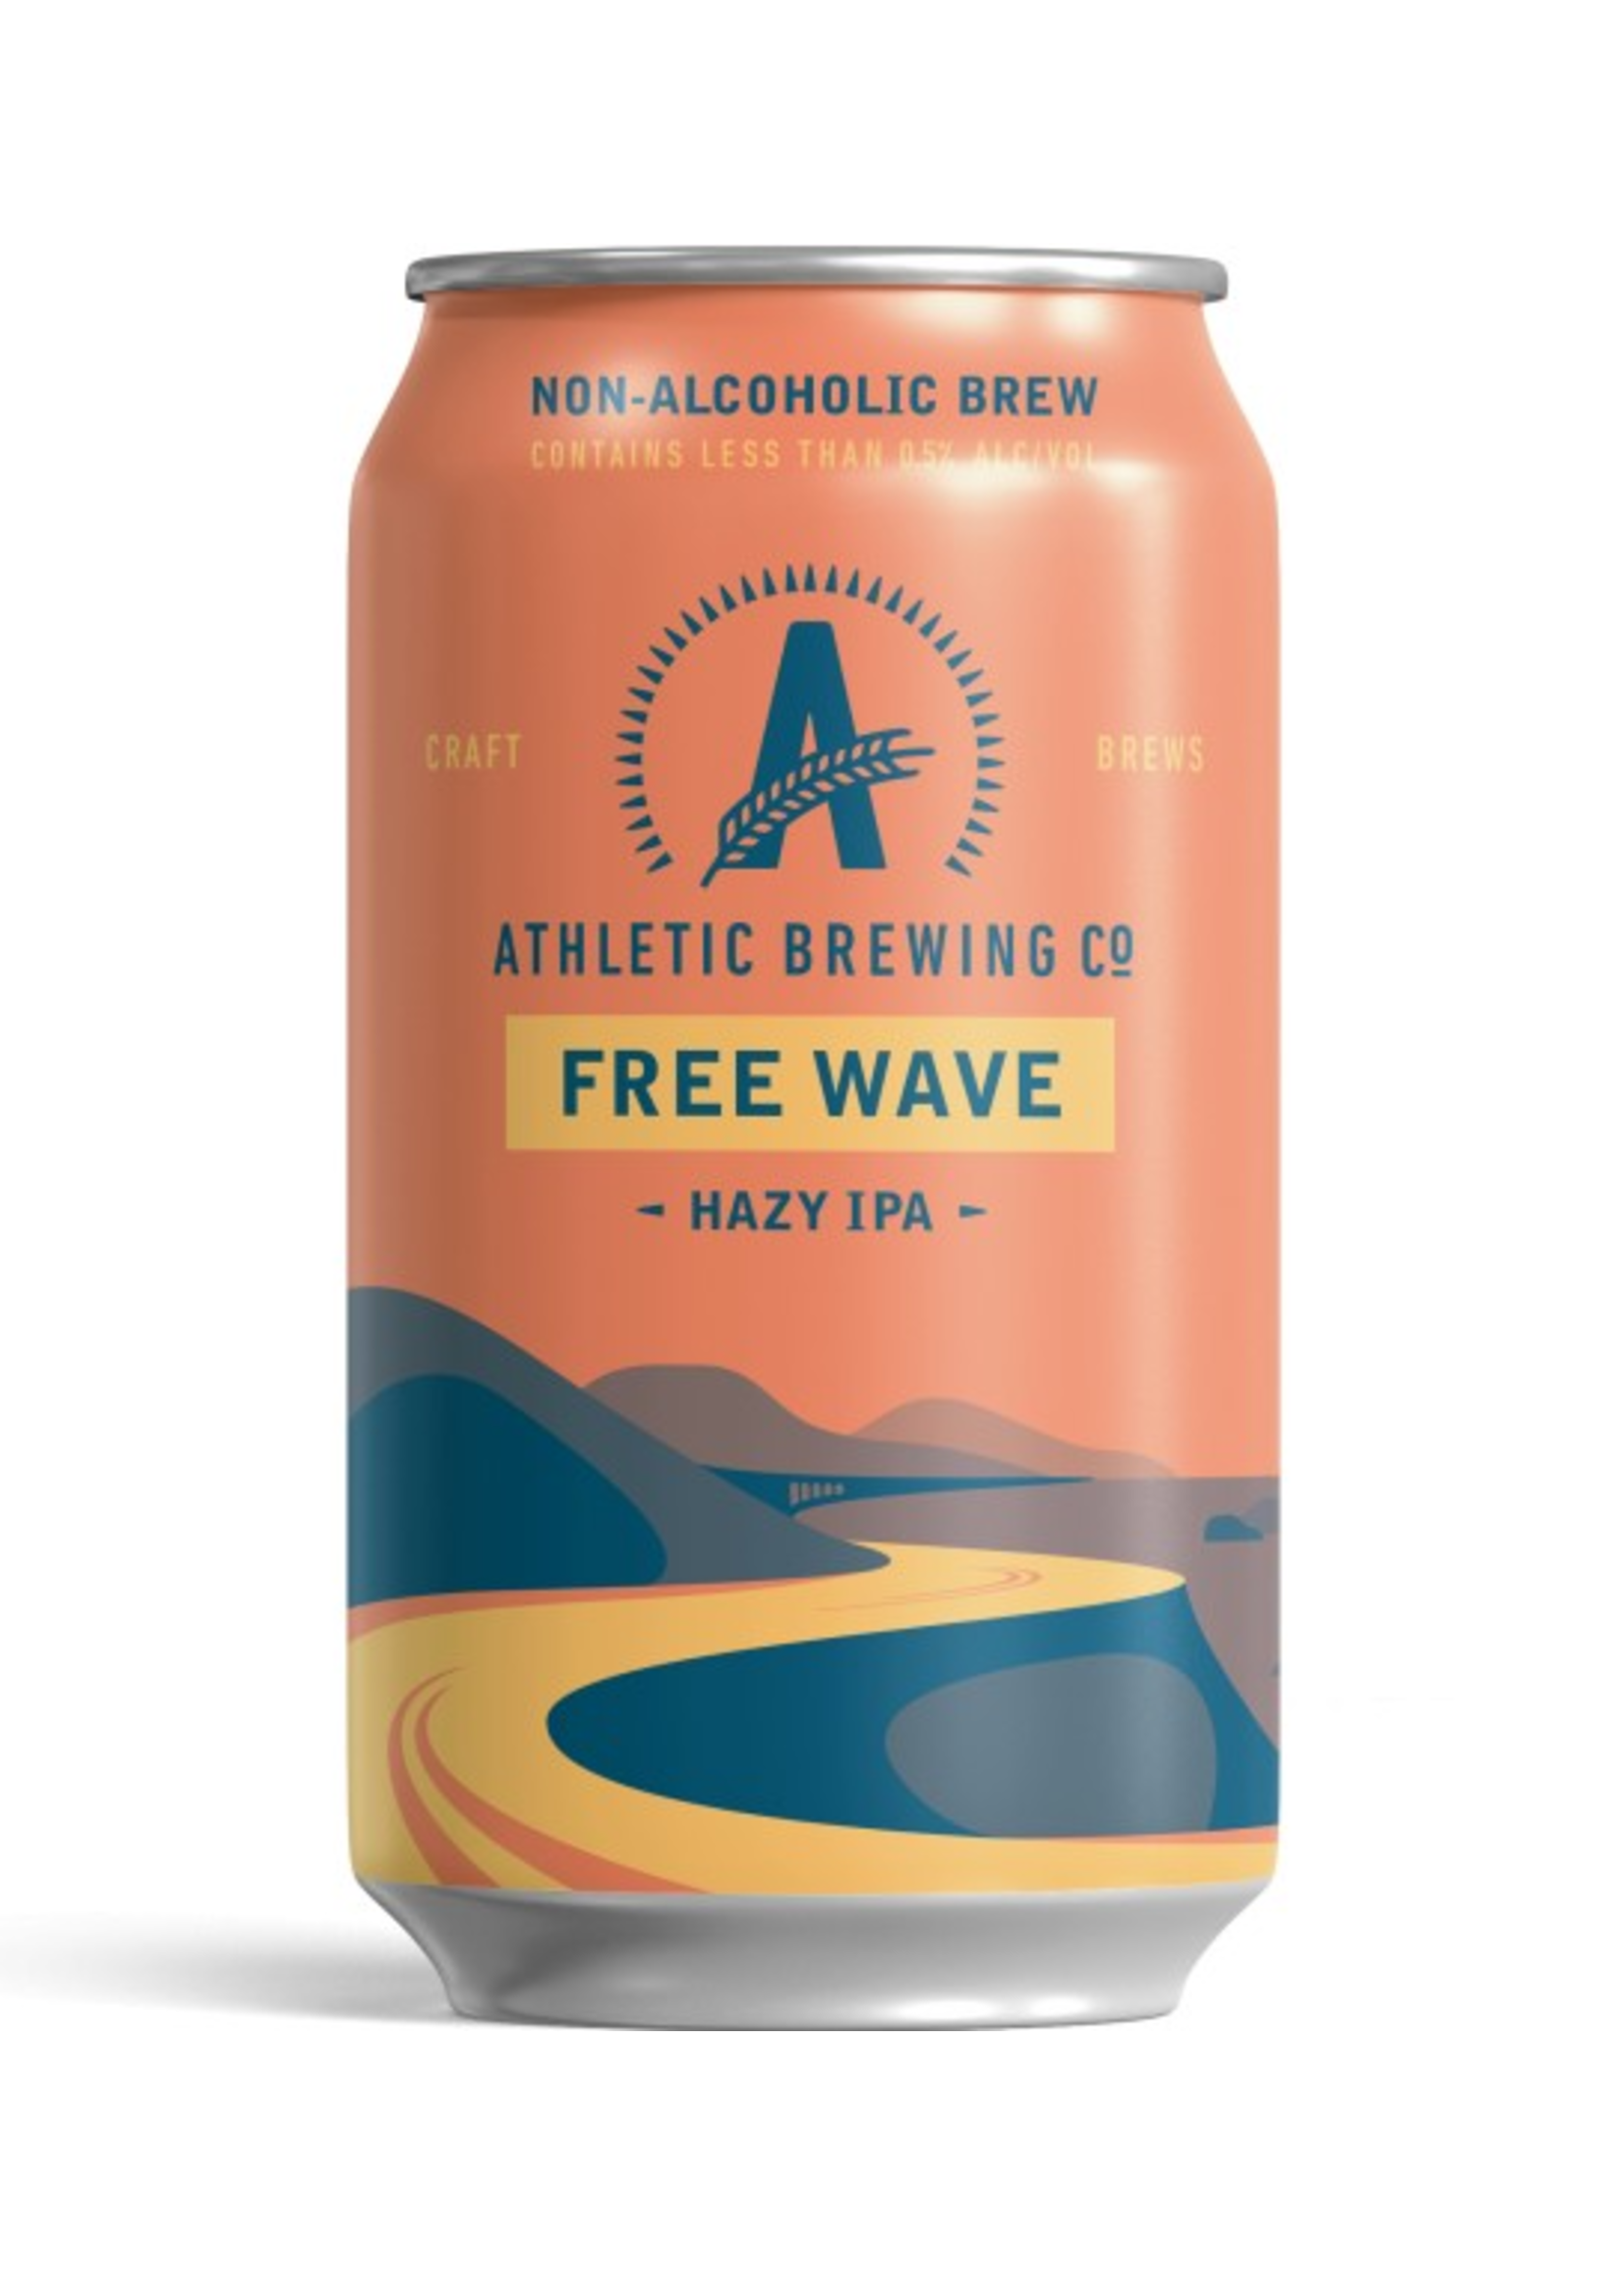 Athletic Brewing Company Non-Alcoholic Beer 6Pack -  Athletic Brewing Company - Free Wave Hazy IPA